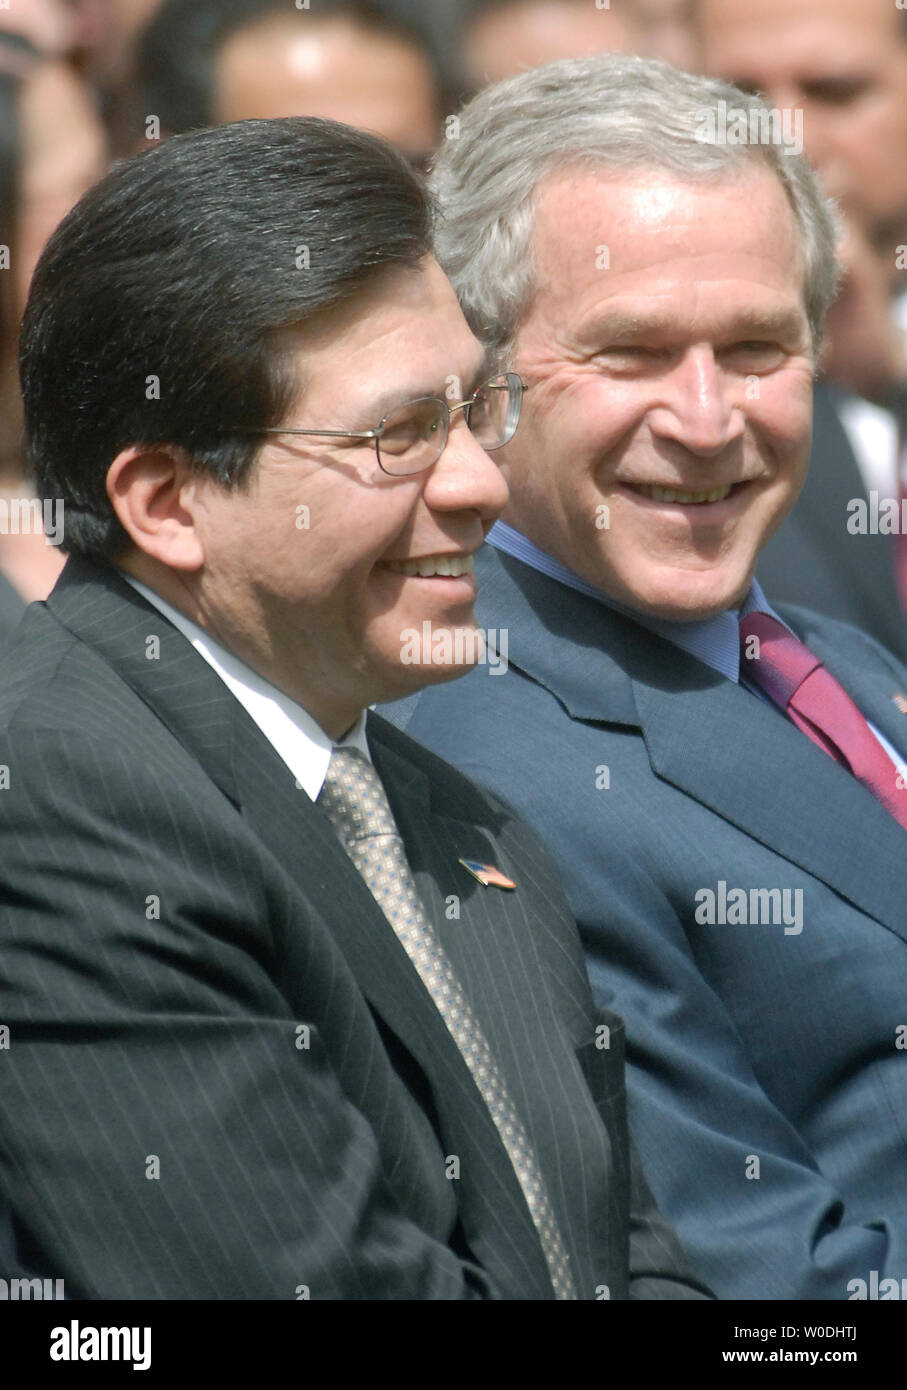 U.S. President George W. Bush (R) sits next to U.S. Attorney General Alberto Gonzales at a Cinco de Mayo celebration in the Rose Garden at The White House in Washington on May 4, 2007. (UPI Photo/Kevin Dietsch) Stock Photo